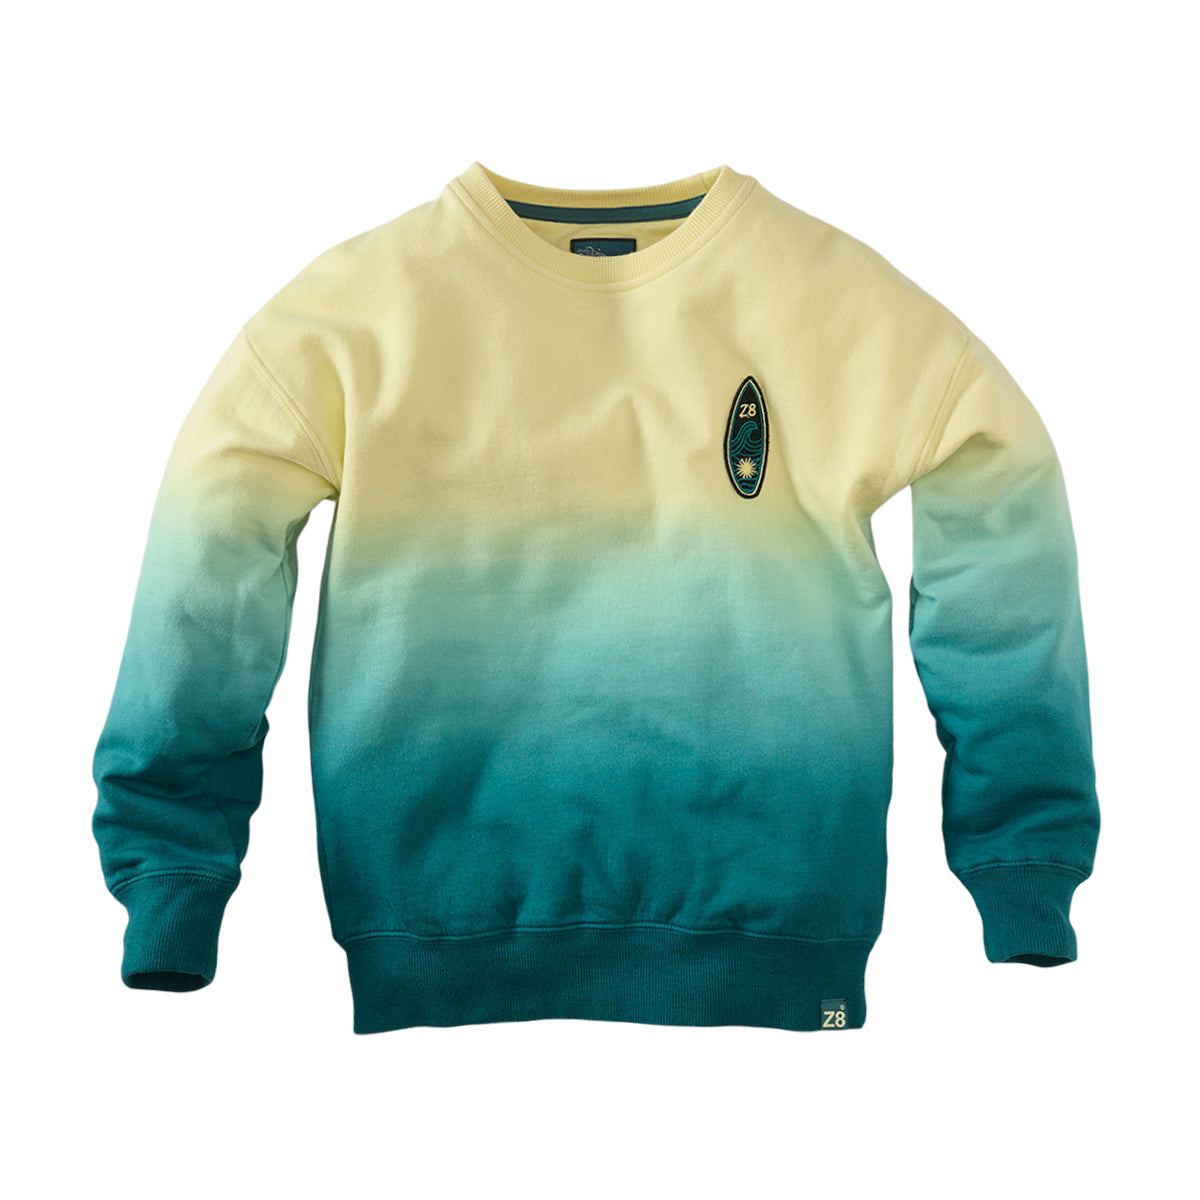 Z8 Sweater Alfred S23